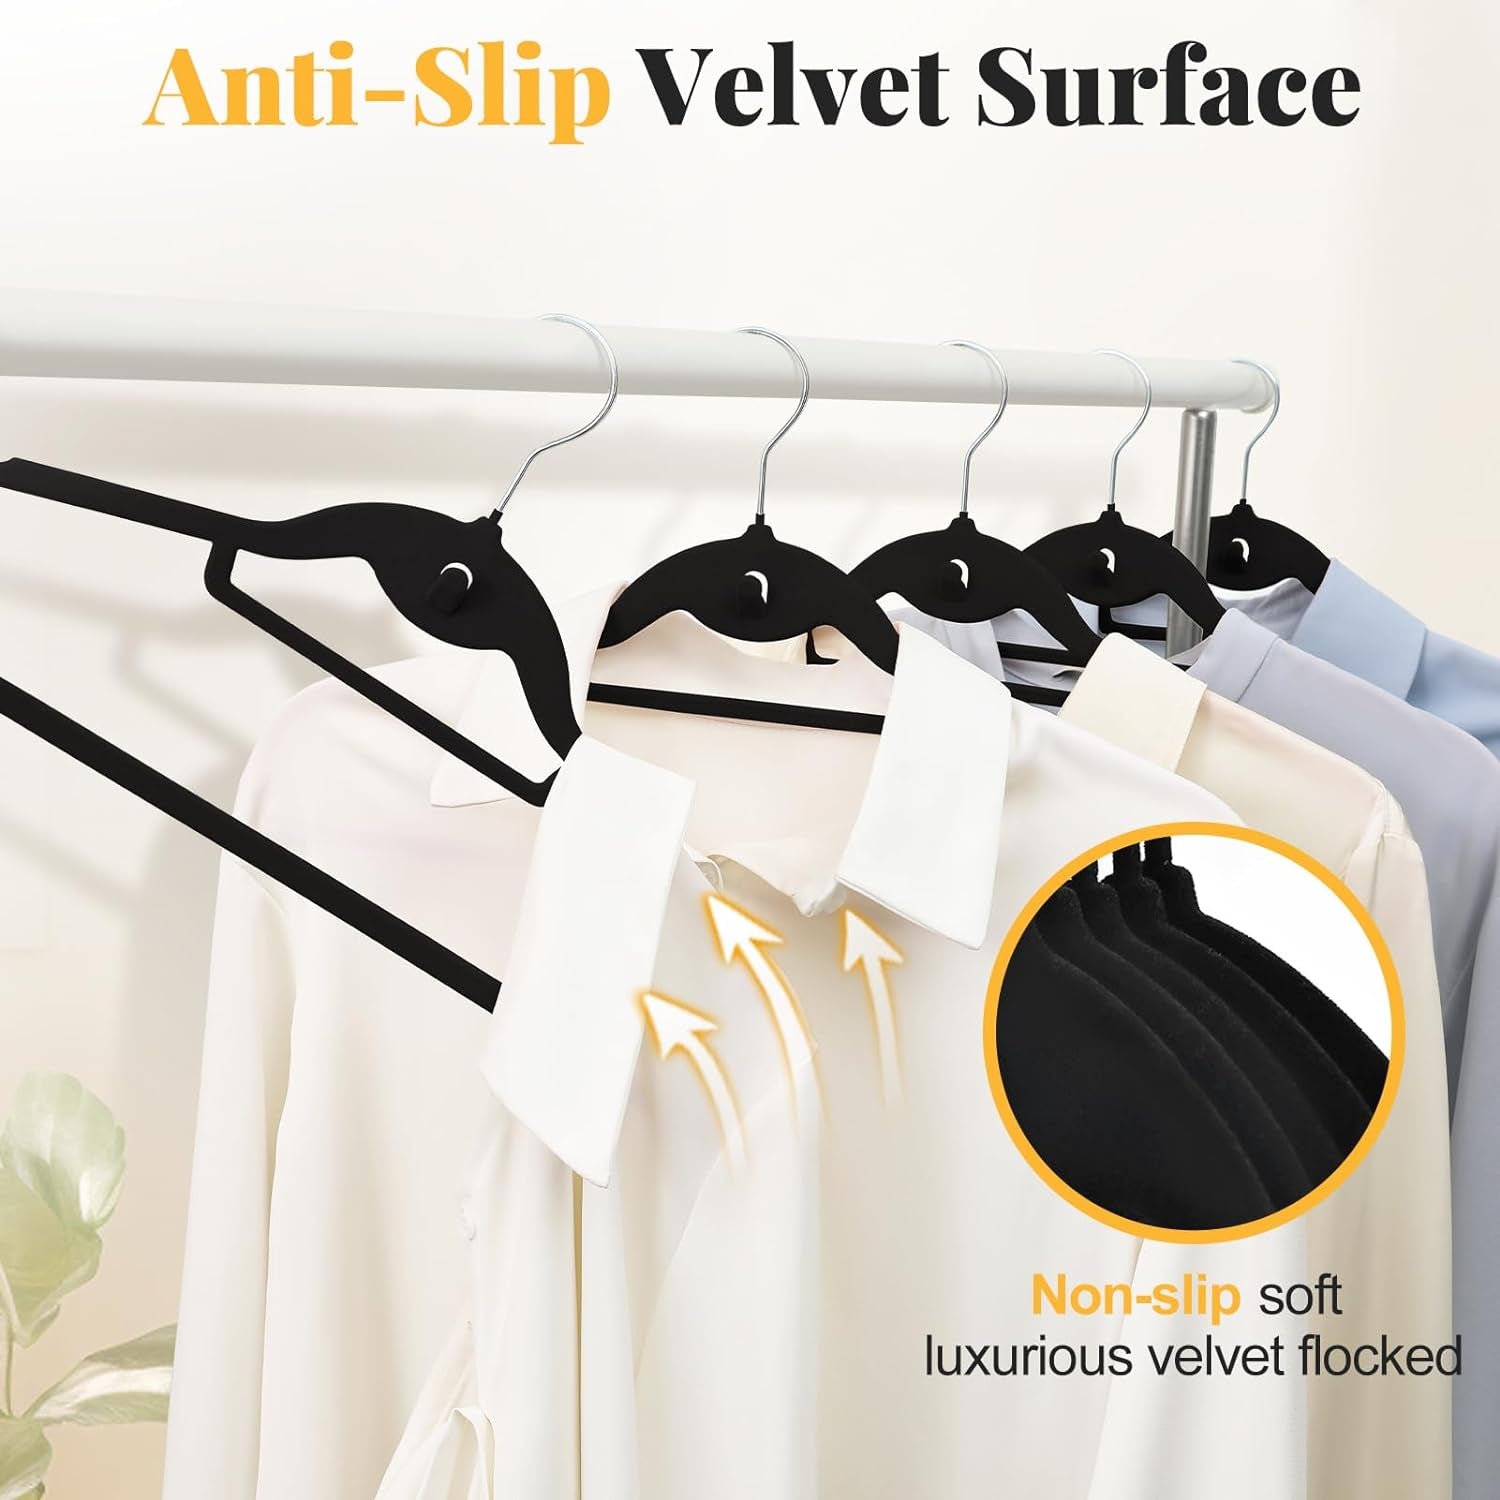 Black Velvet Hangers 50 Pack, S-Shaped and Stackable Non Slip Felt Hanger with 360°Swivel Hook, Ultra Thin and Space Saving Flocked Hangers for Suits, Shirts, Coats, 15Lbs Capacity Heavy Duty